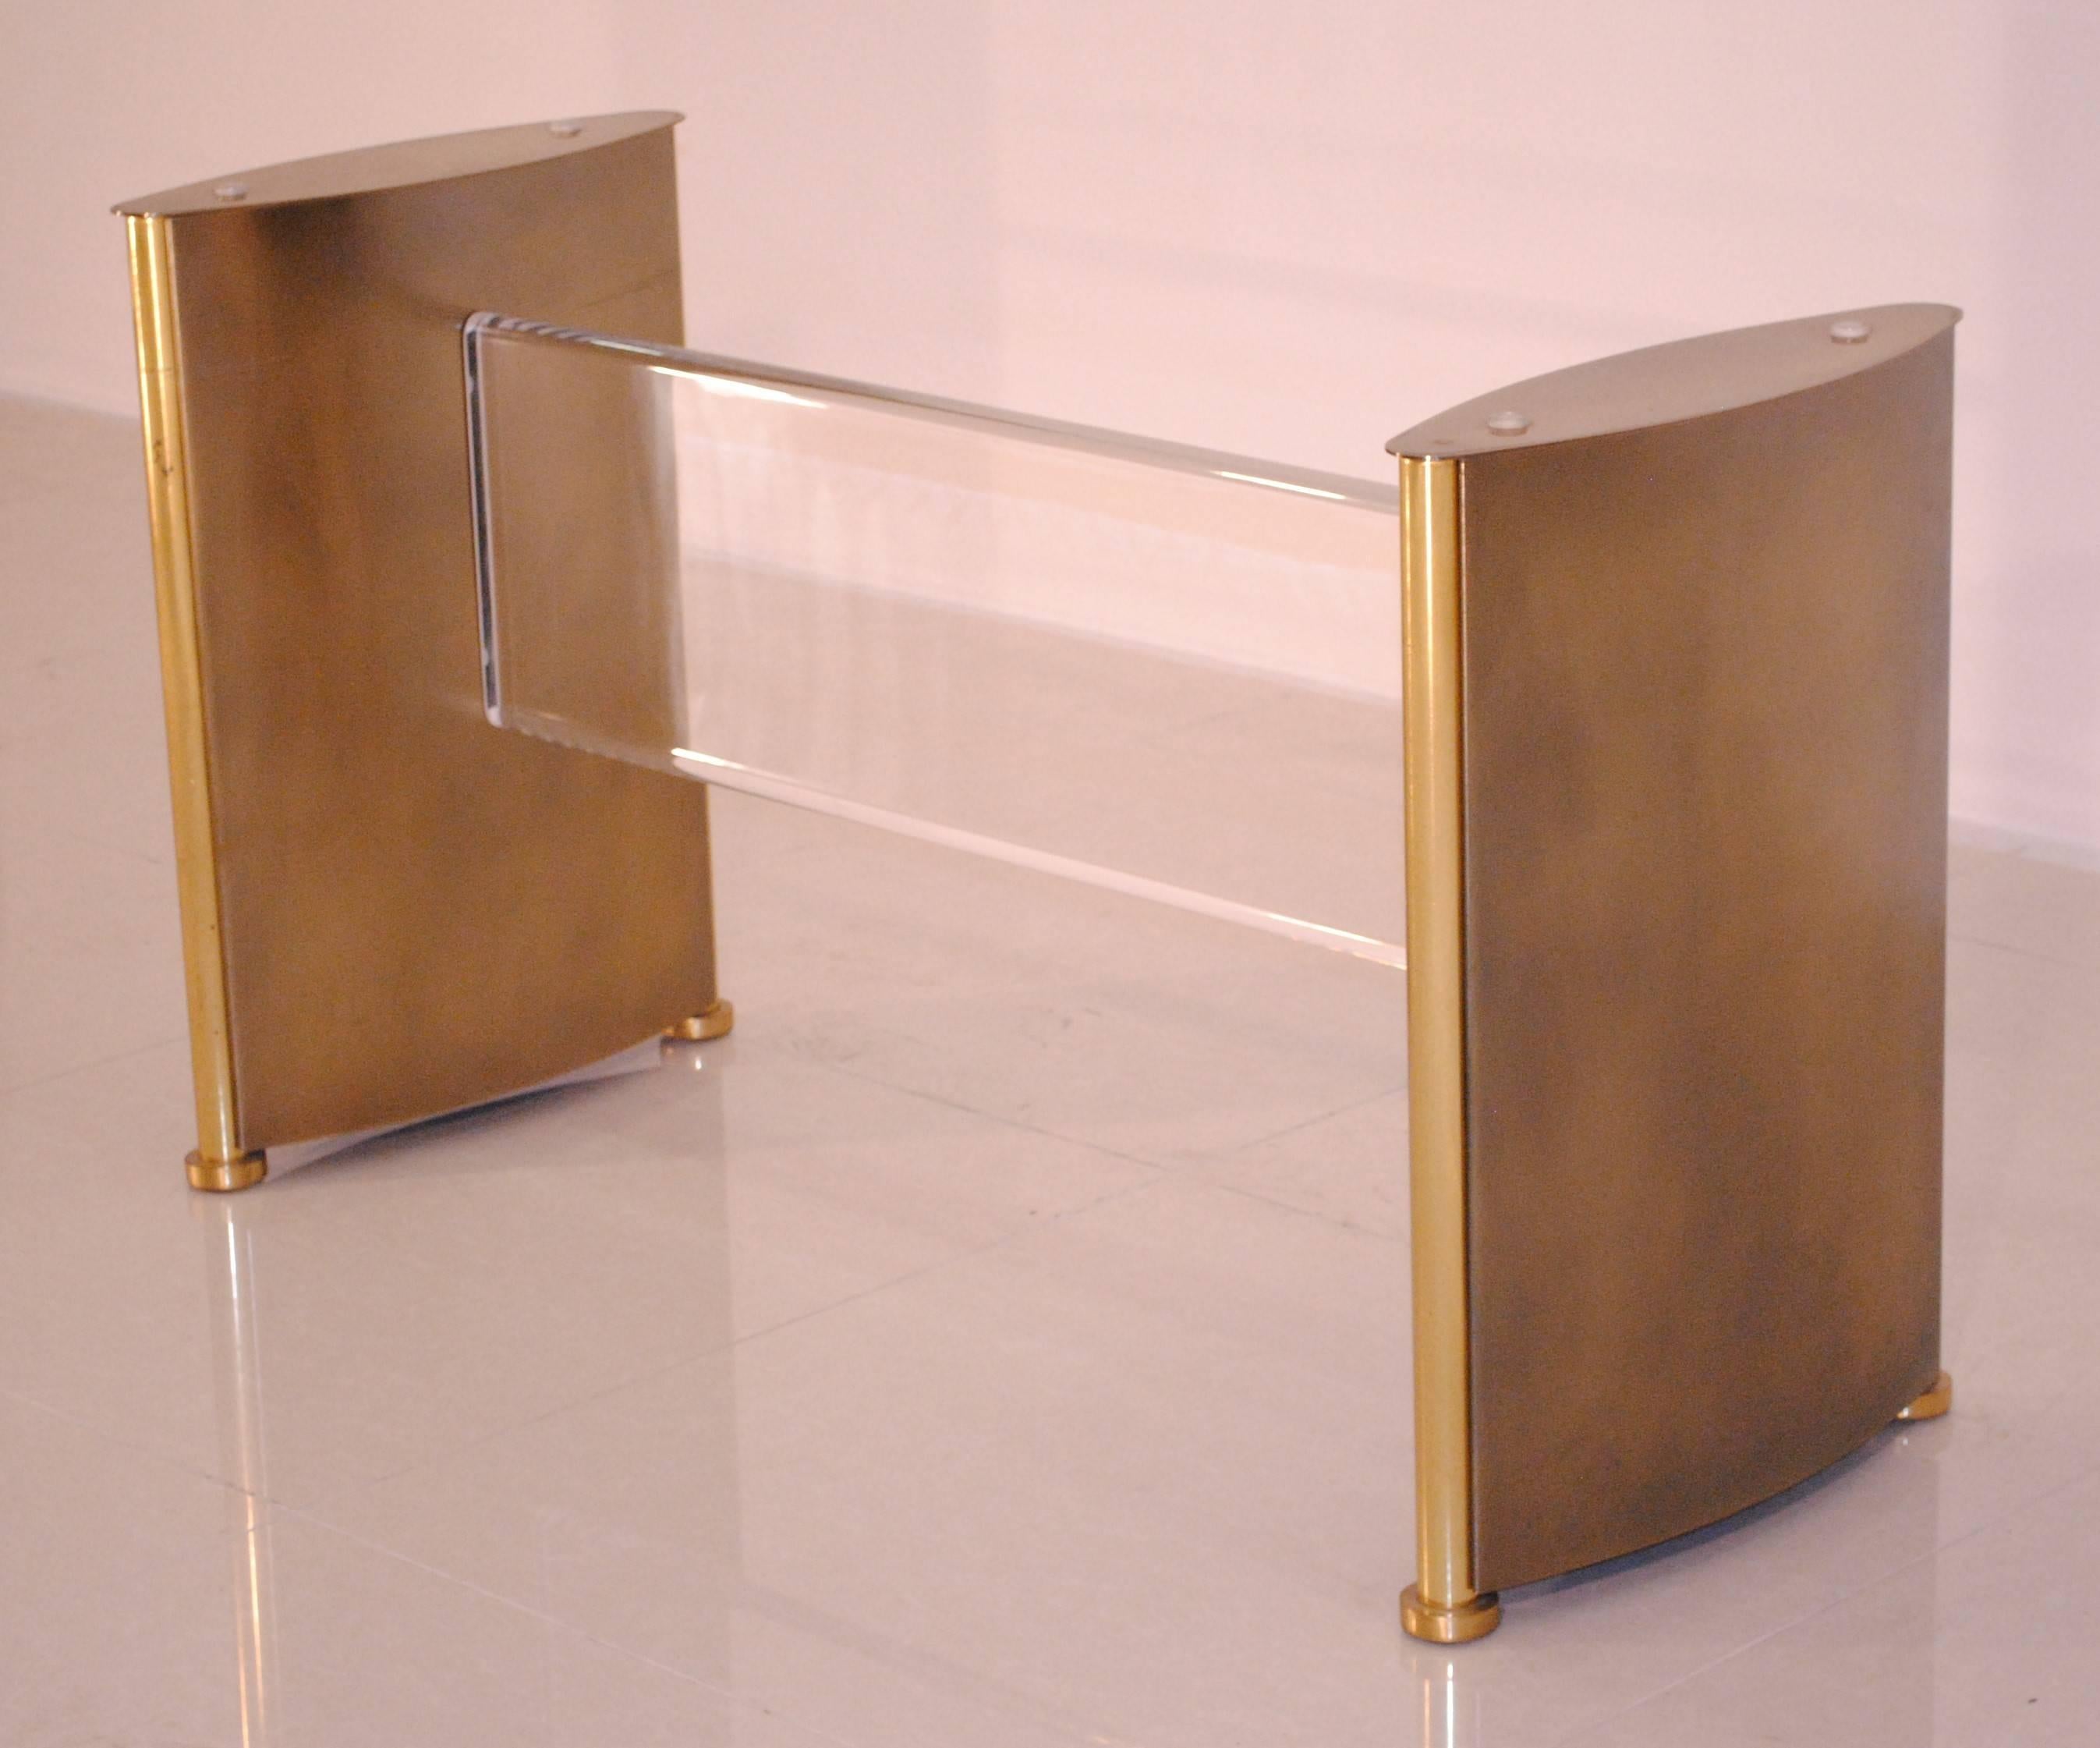 A very classy Lucite, brushed bronze patina and gold-plated brass details dining table base, can also be used as wall console.
The very solid base can easily support a very large top.

Belgochrom is a high quality Belgian fabrication of the late